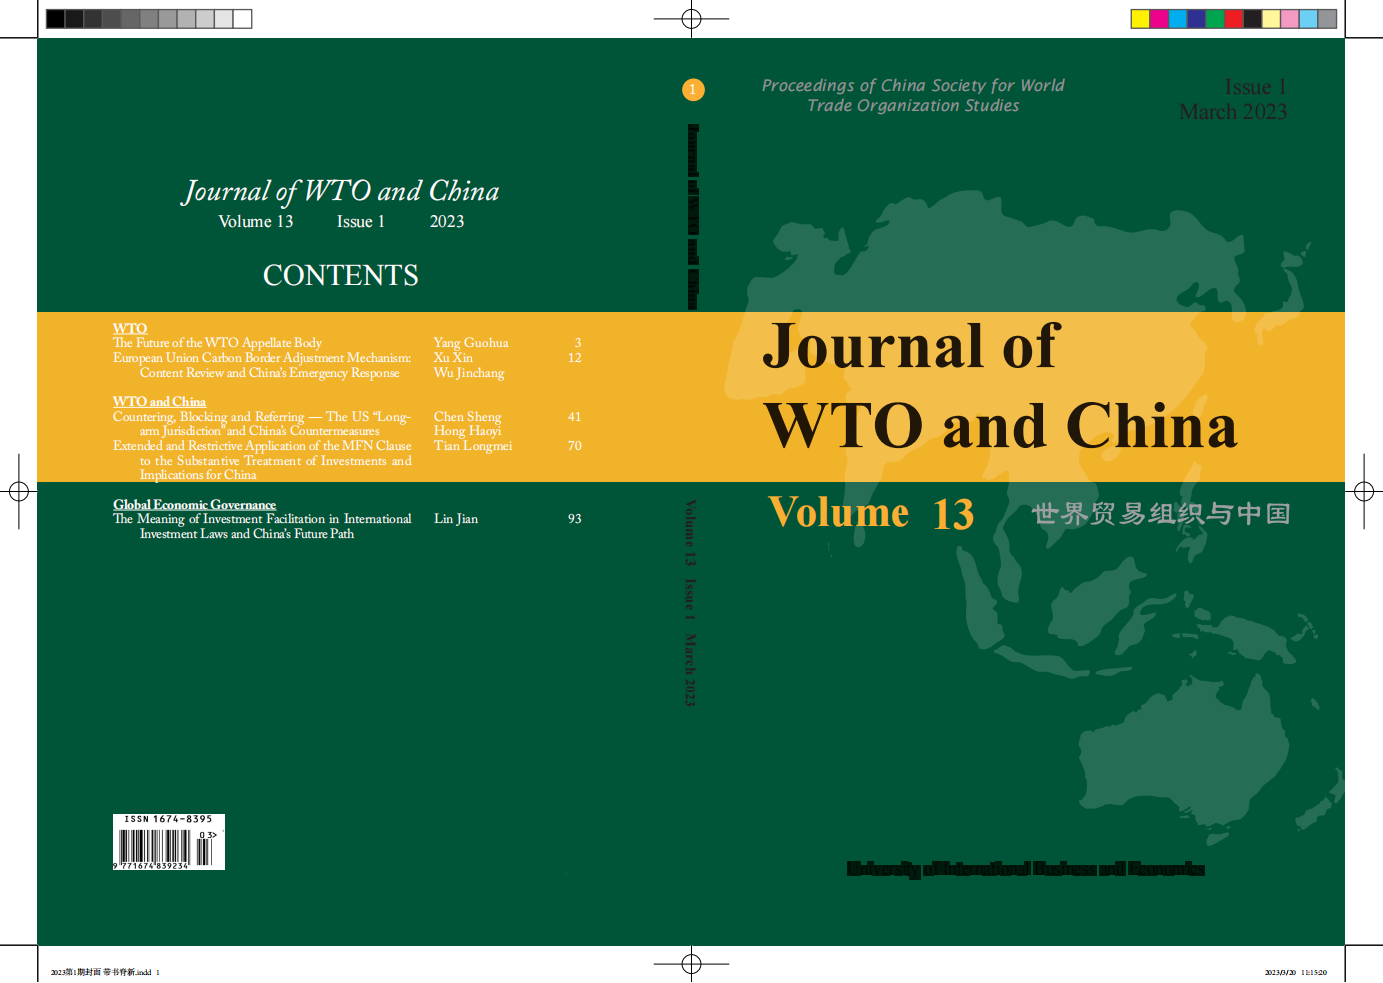 Journal of WTO and China vol. 13 issue 1 2023 cover_00.png